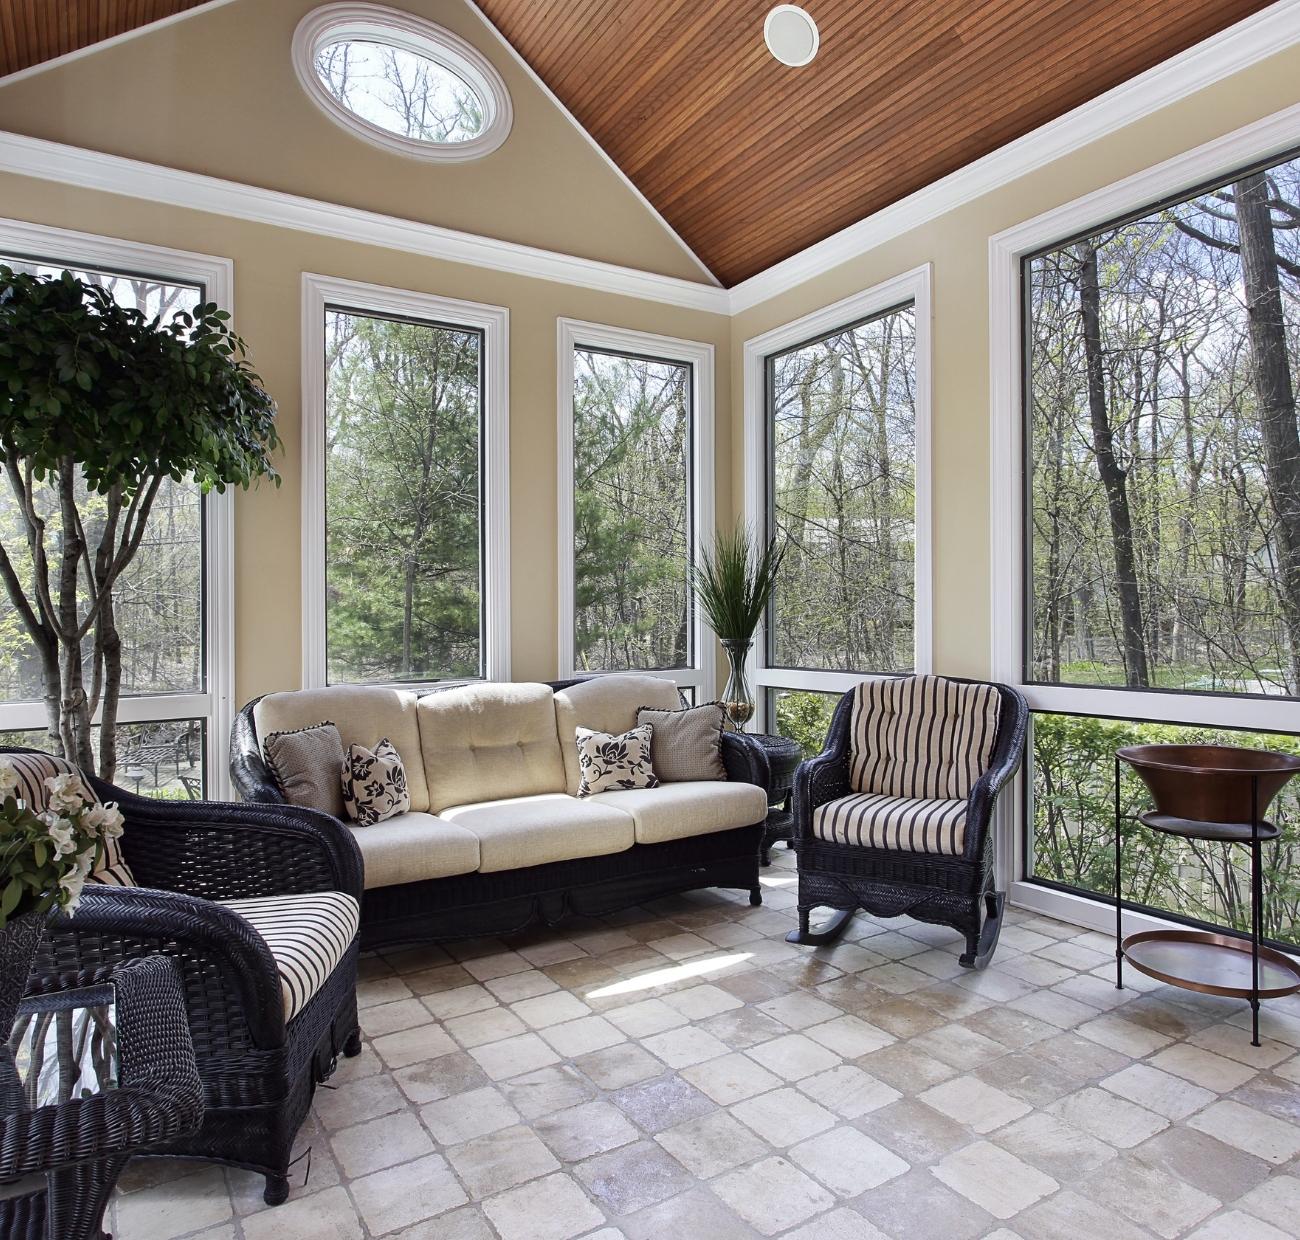 Inplico-Projects-Sunrooms-009-1300x1240